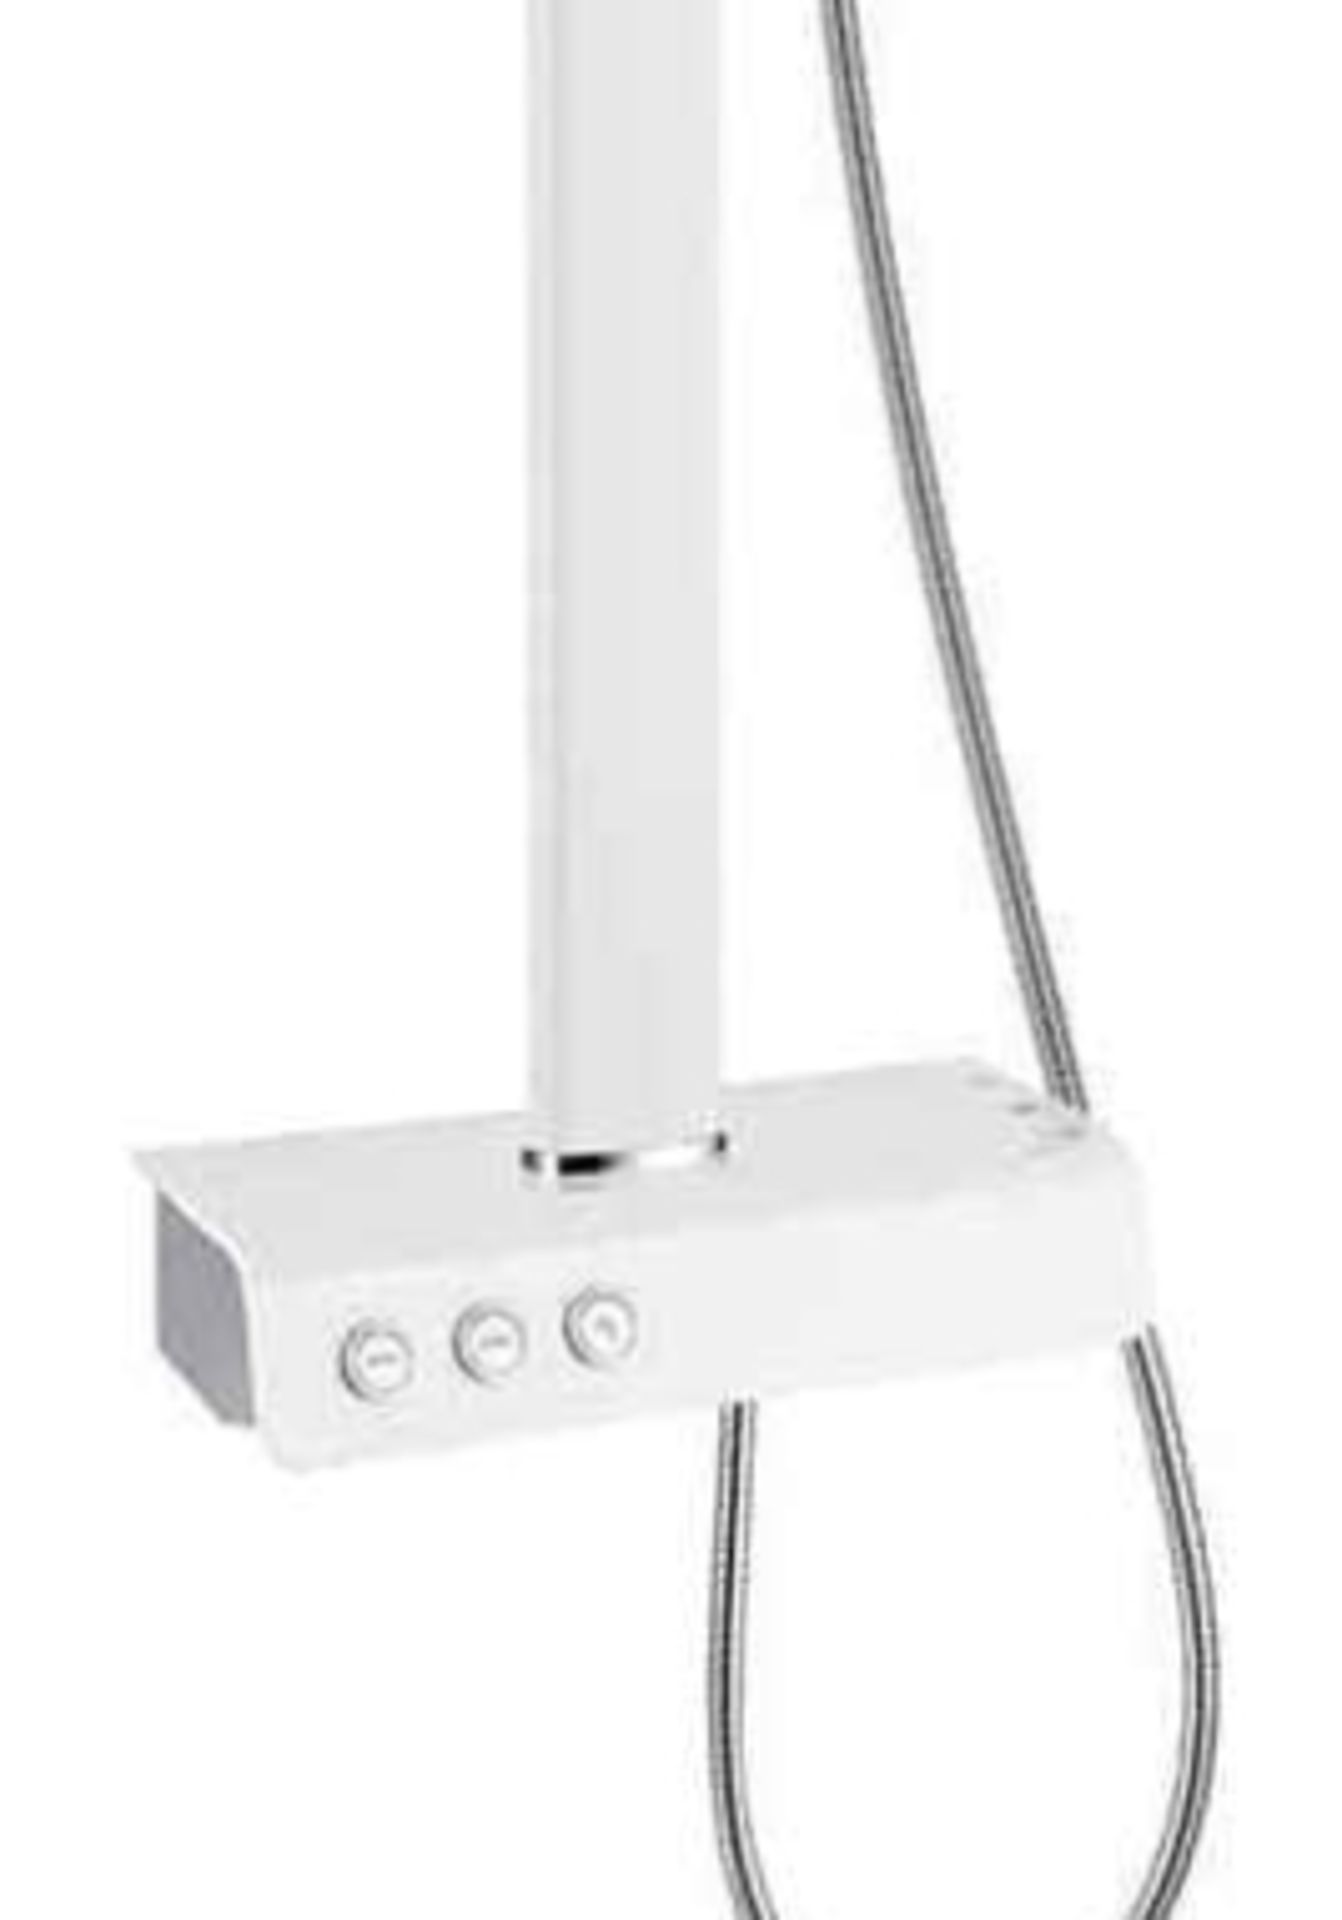 1 x Synergy Nubian White Thermostatic Shower Panel Kit and Handset - New Boxed Stock - RRP £549! - Image 6 of 6